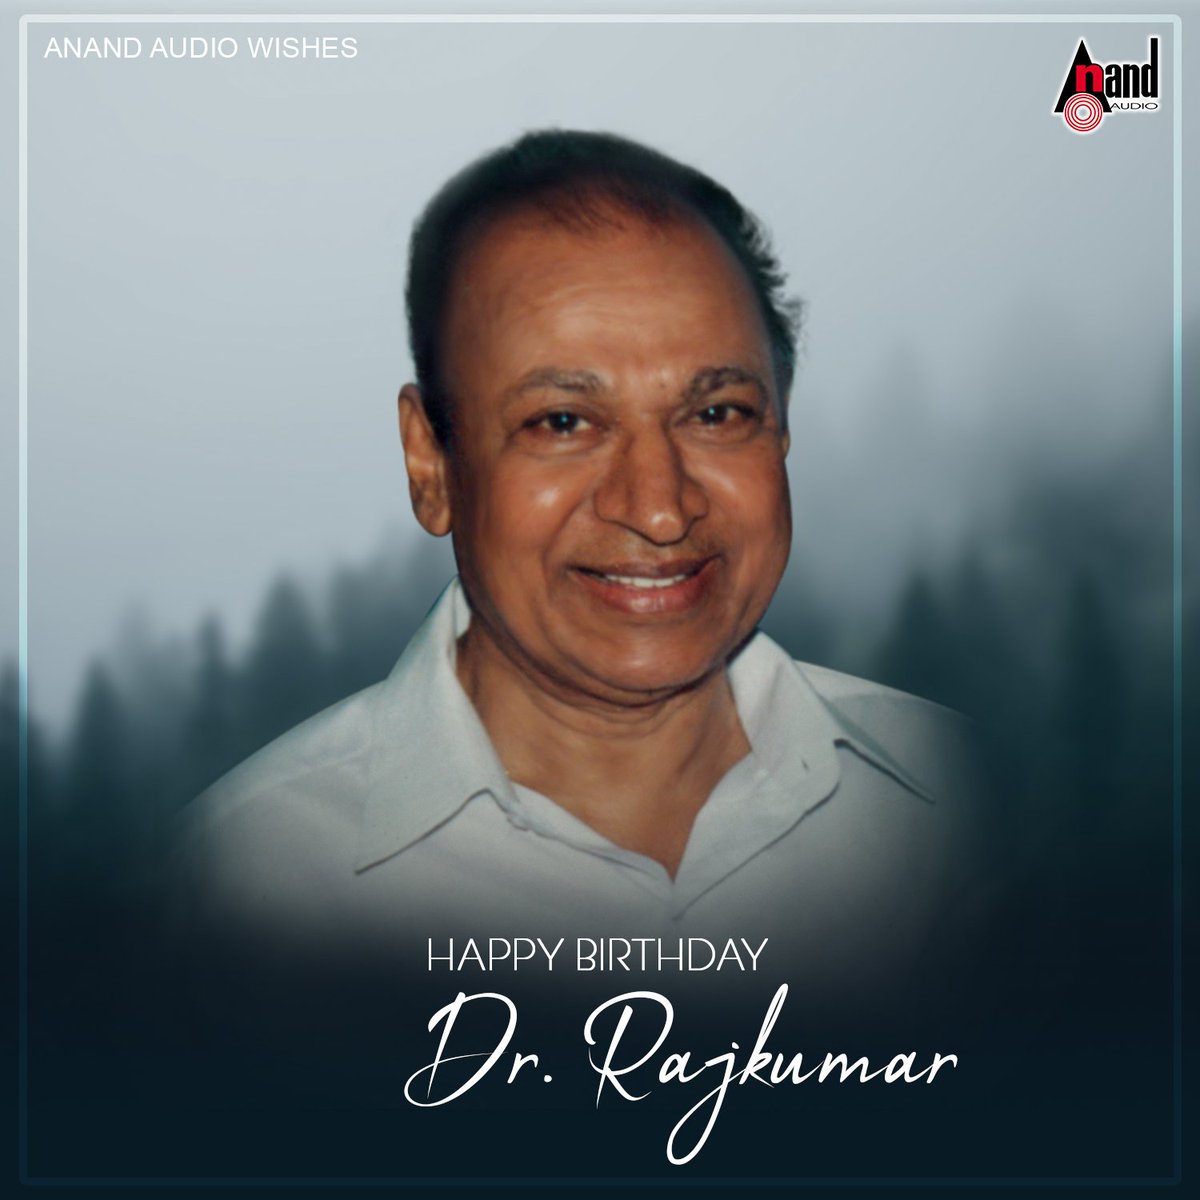 He will be remembered always in our Hearts. Wishing HBD to #DrRajkumar sir @shyam_chabria @aanandaaudio